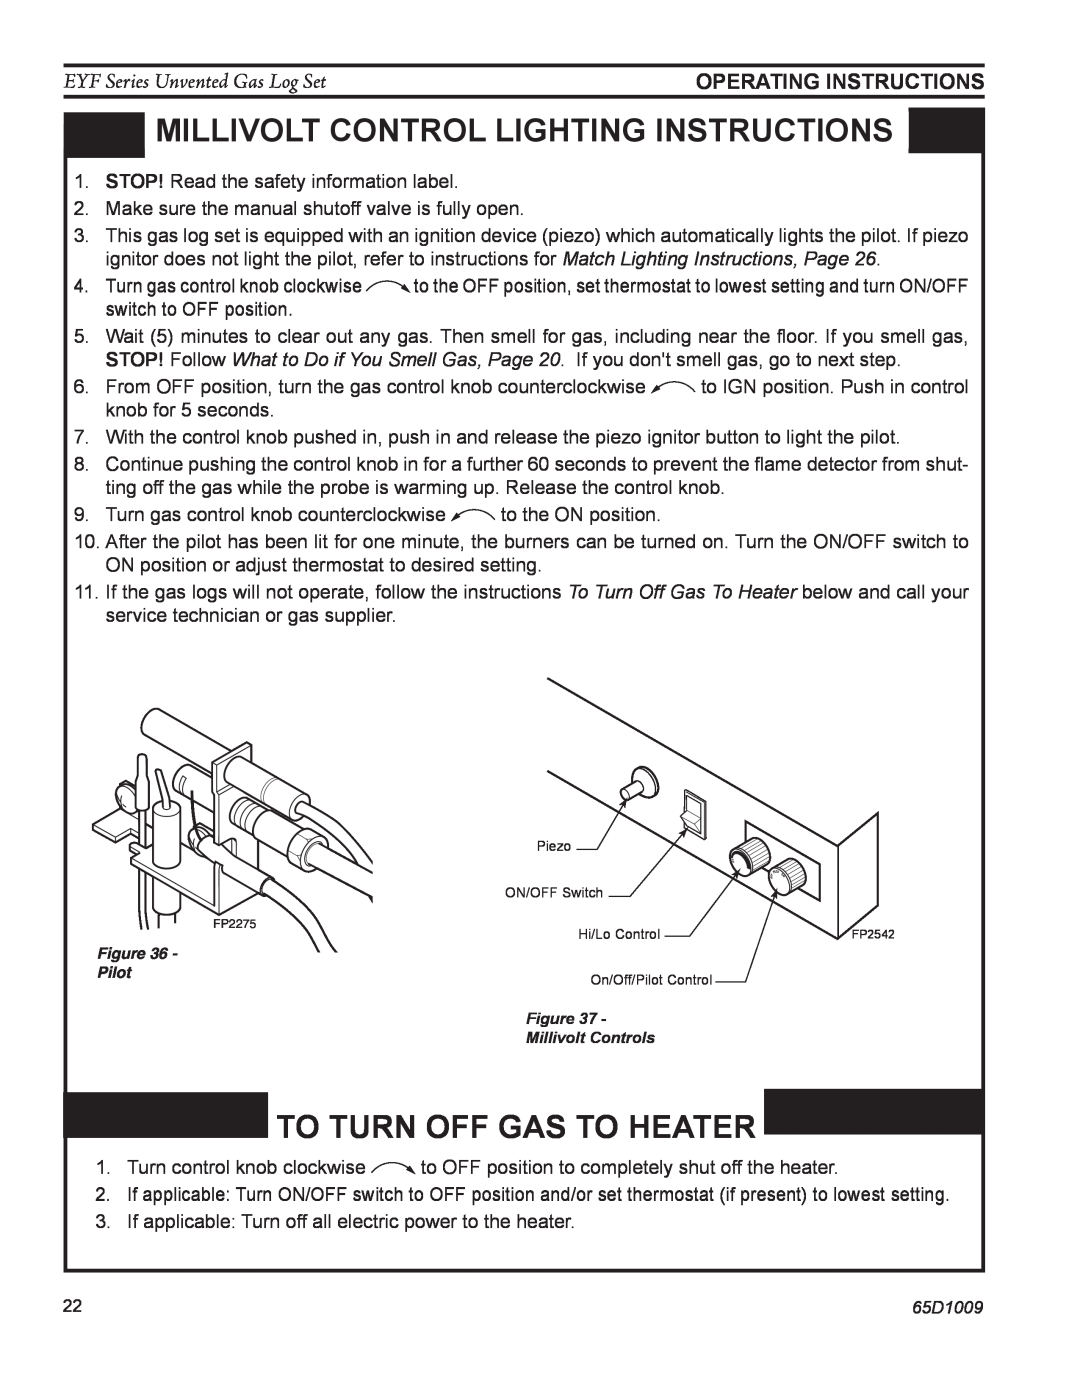 Monessen Hearth EYF24 Millivolt control lighting instructions, To Turn Off Gas To Heater, EYF Series Unvented Gas Log Set 